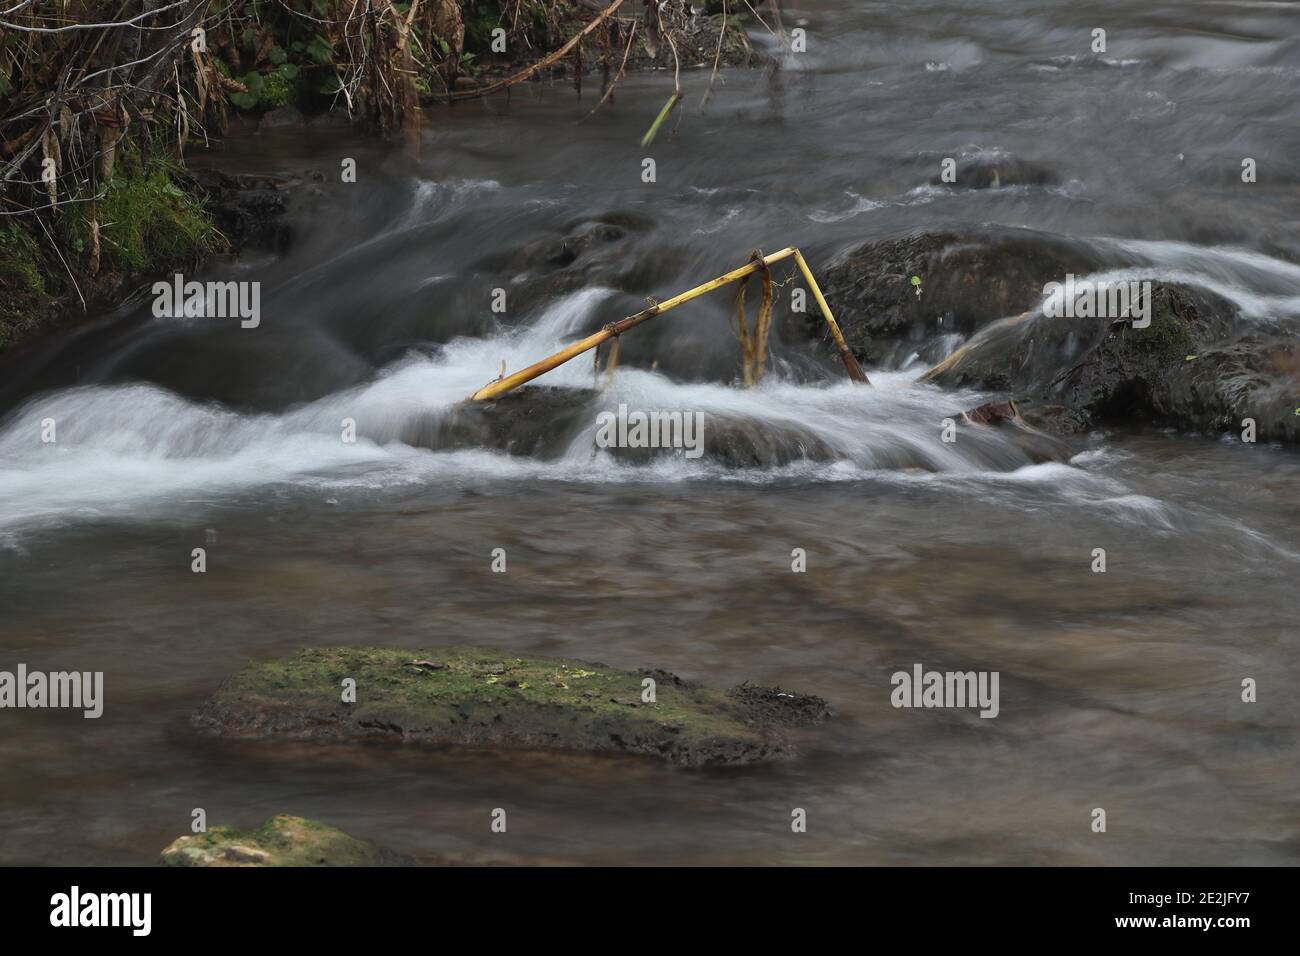 scenic of white water rapids in a creek Stock Photo